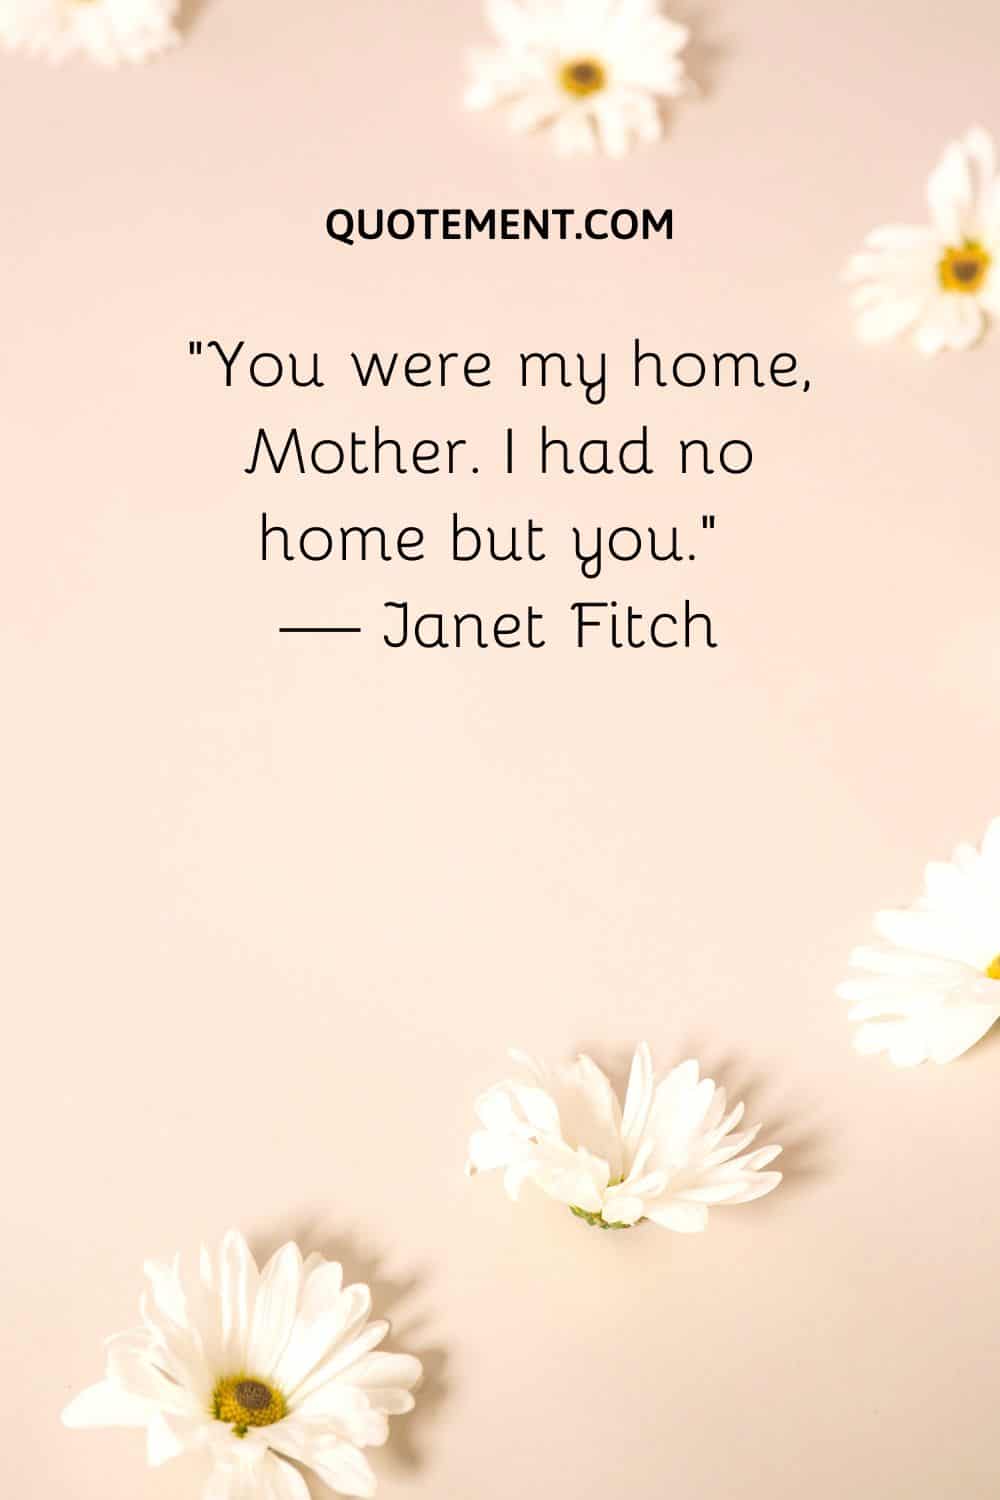 You were my home, Mother. I had no home but you.